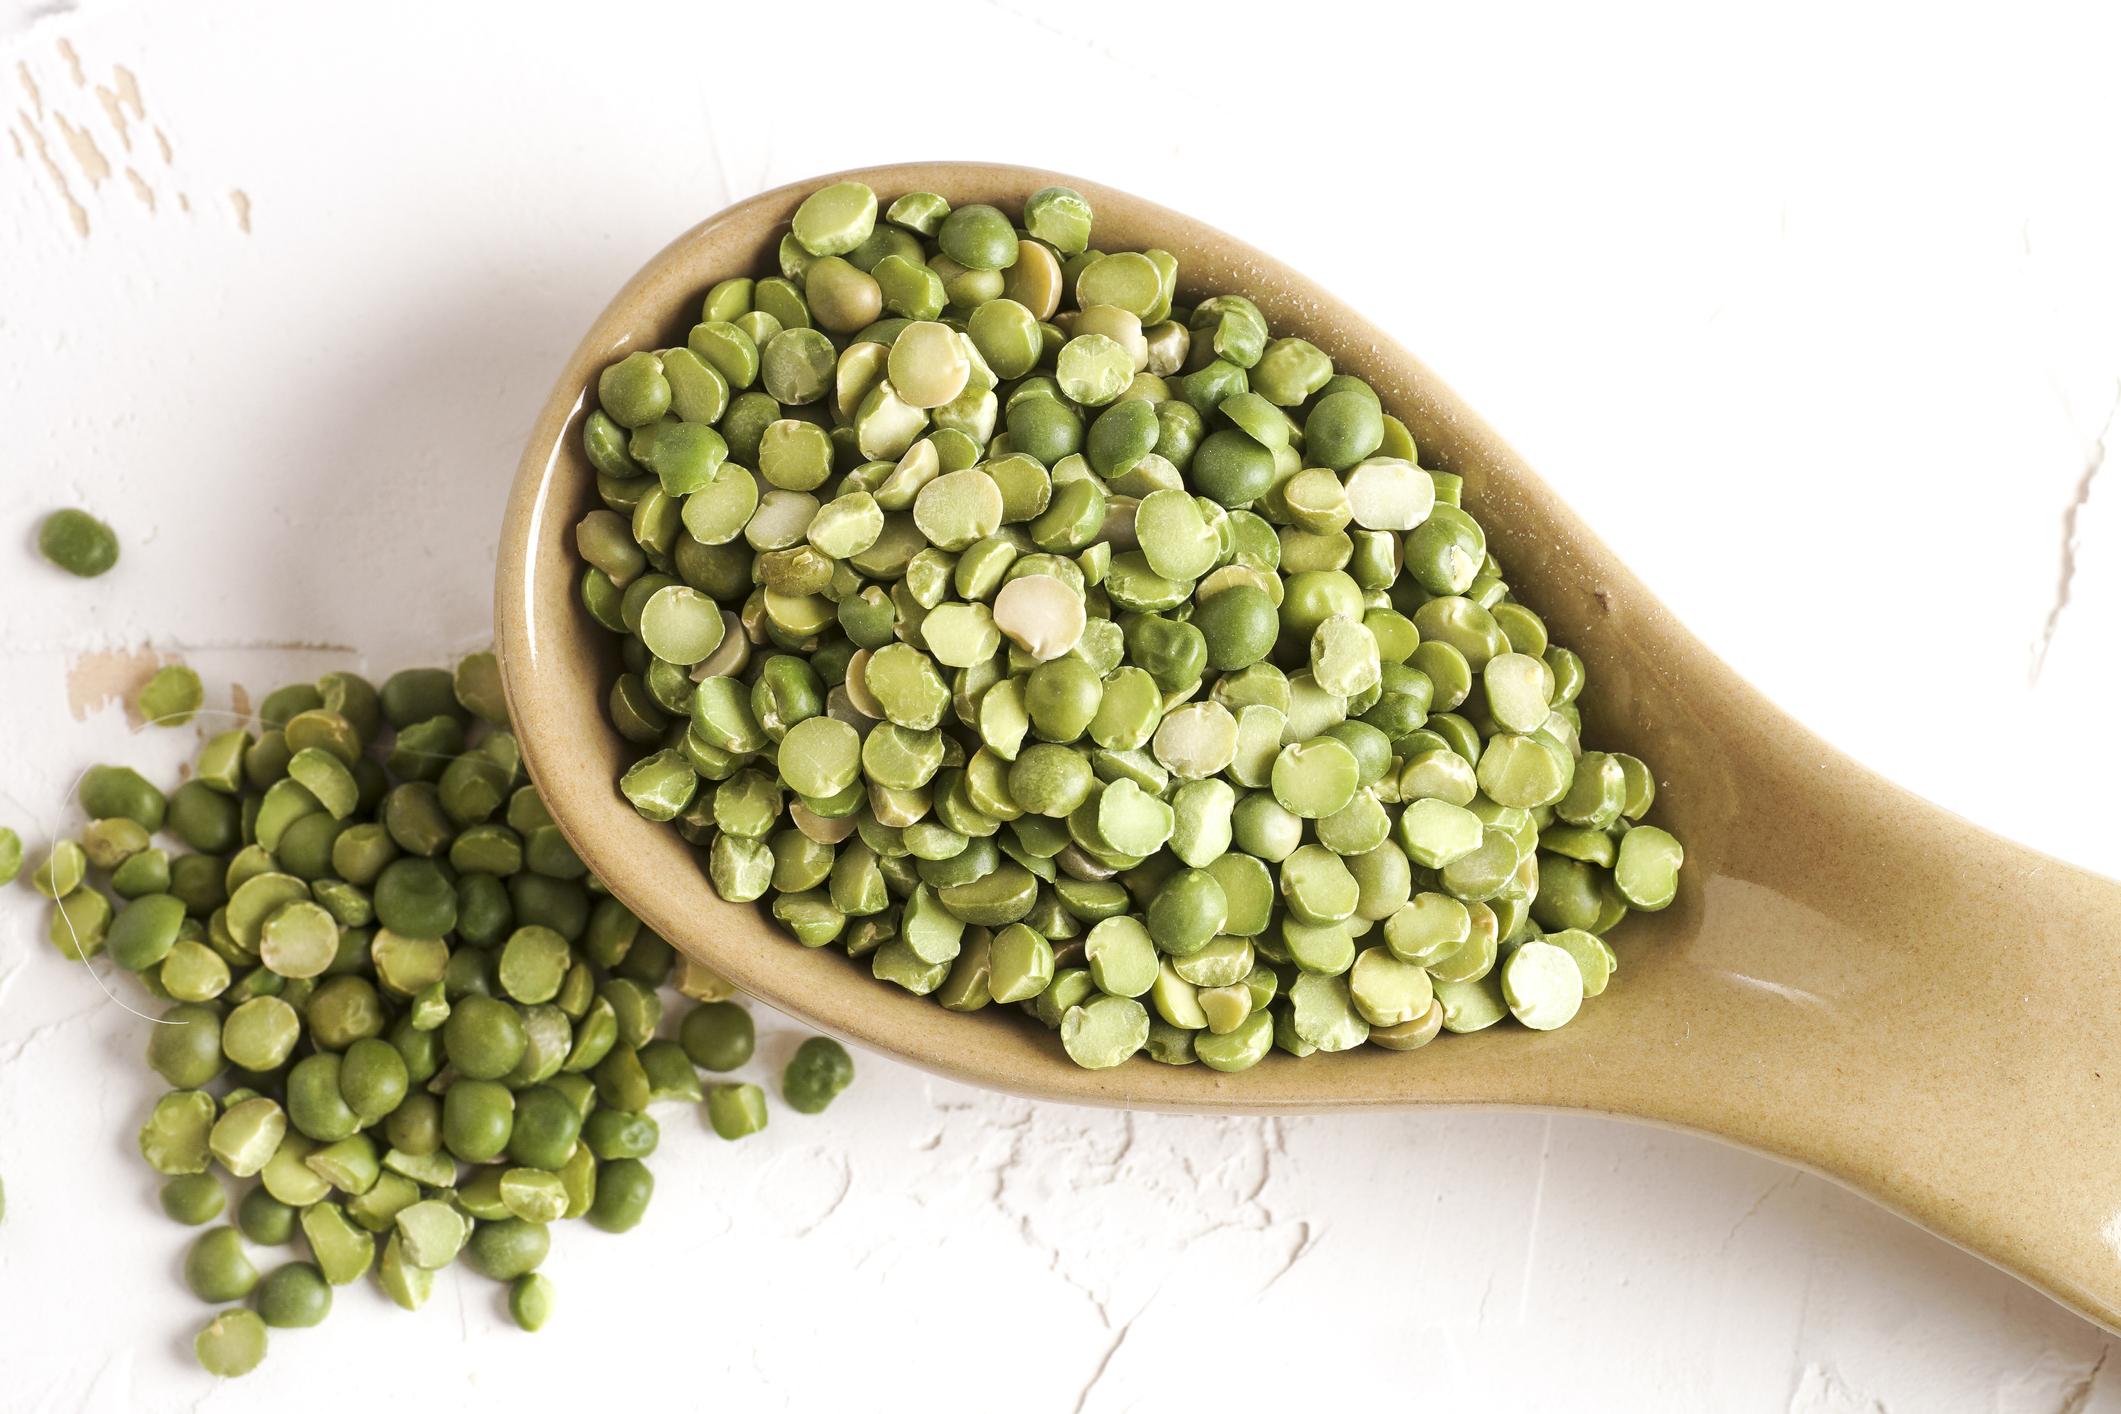 Roquette produces new plant-based proteins from peas and fava beans